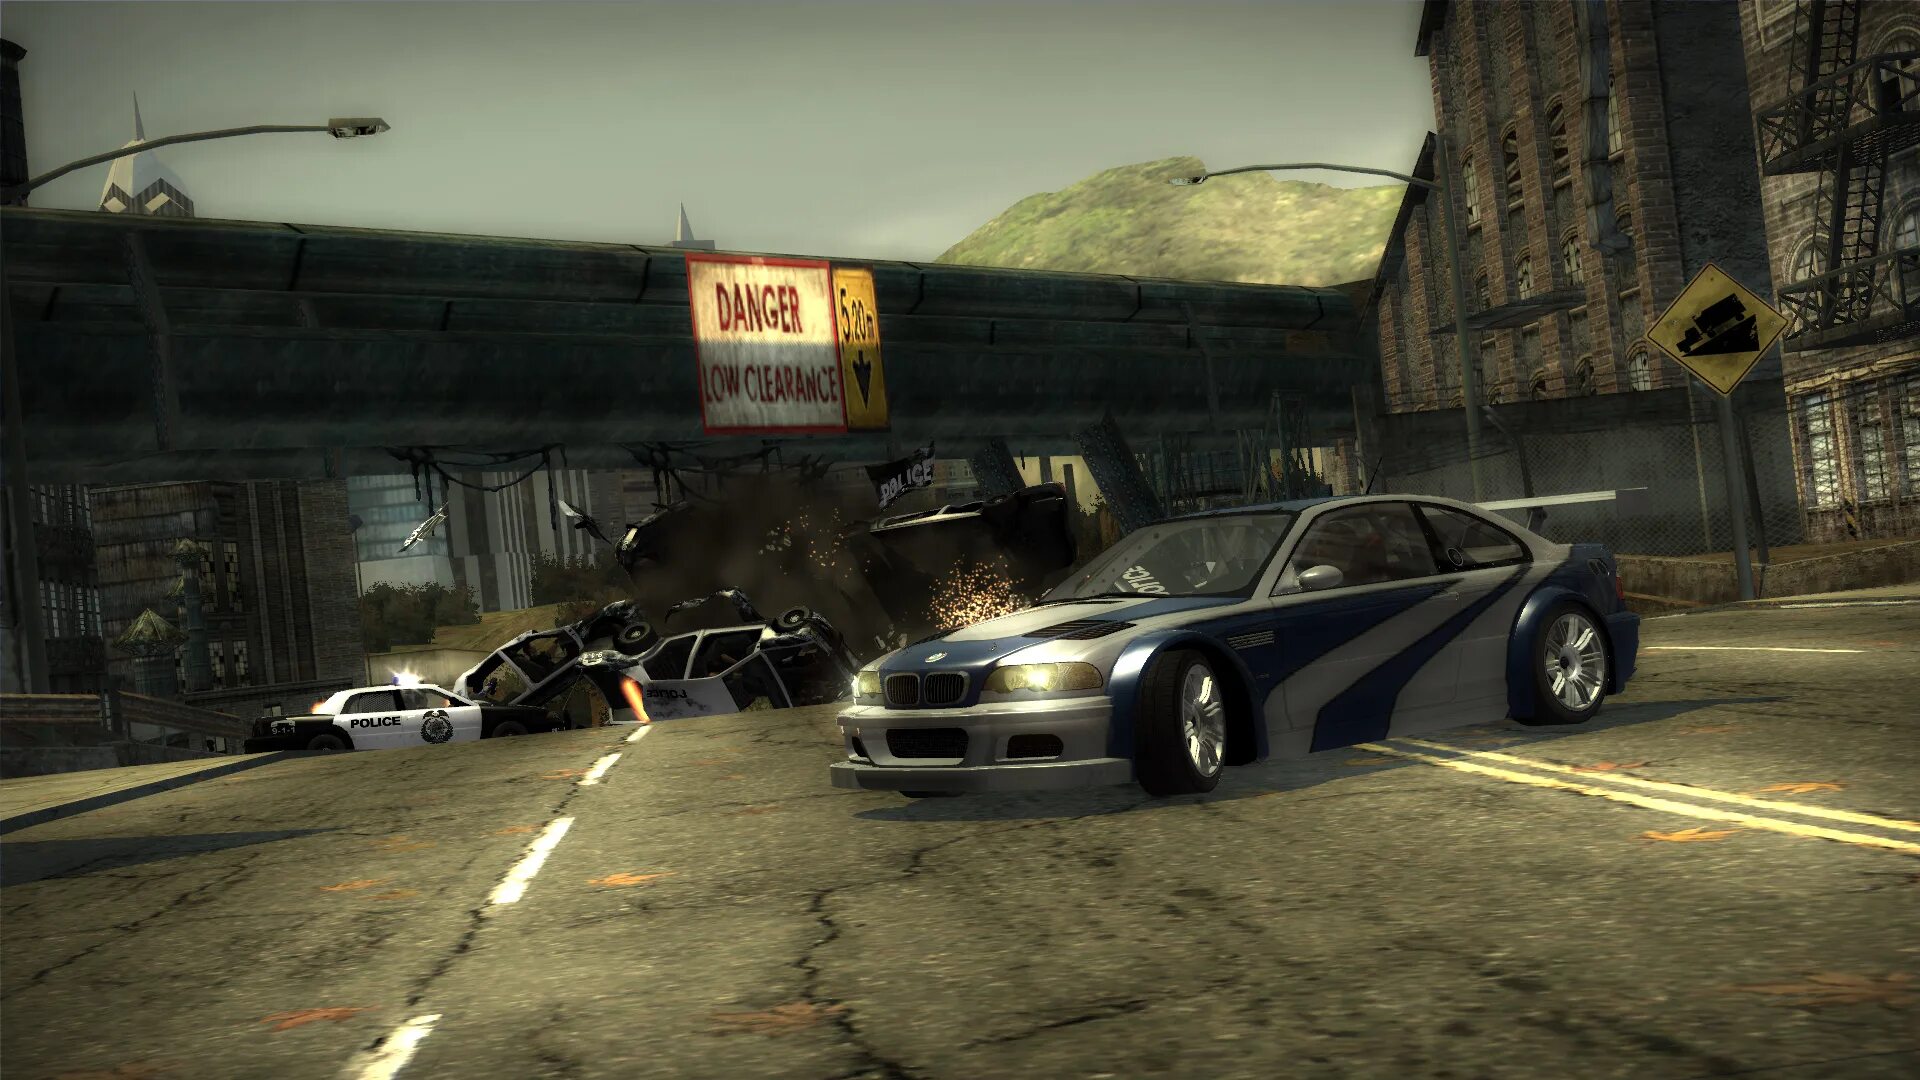 Бета NFS MW 2005. Гонки NFS most wanted 2005. NFS MW 2005 ps2. Новый NFS most wanted 2005. E demo